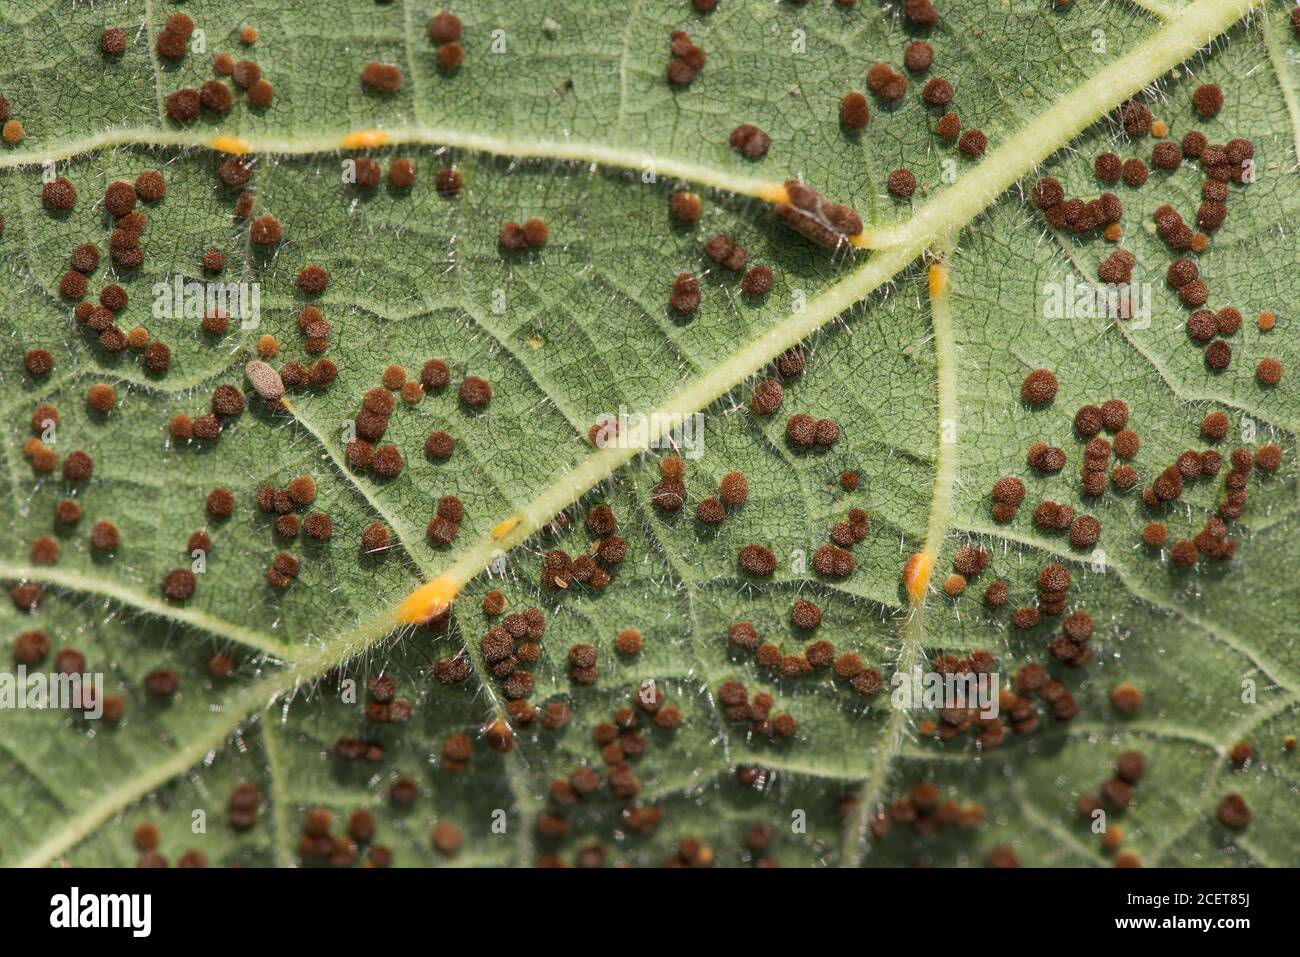 Hollyhock rust caused by fungus Puccinia heterospora or P.malvacearum  lower leaves of broad leafed plant covered in disease rife hot humid conditions Stock Photo